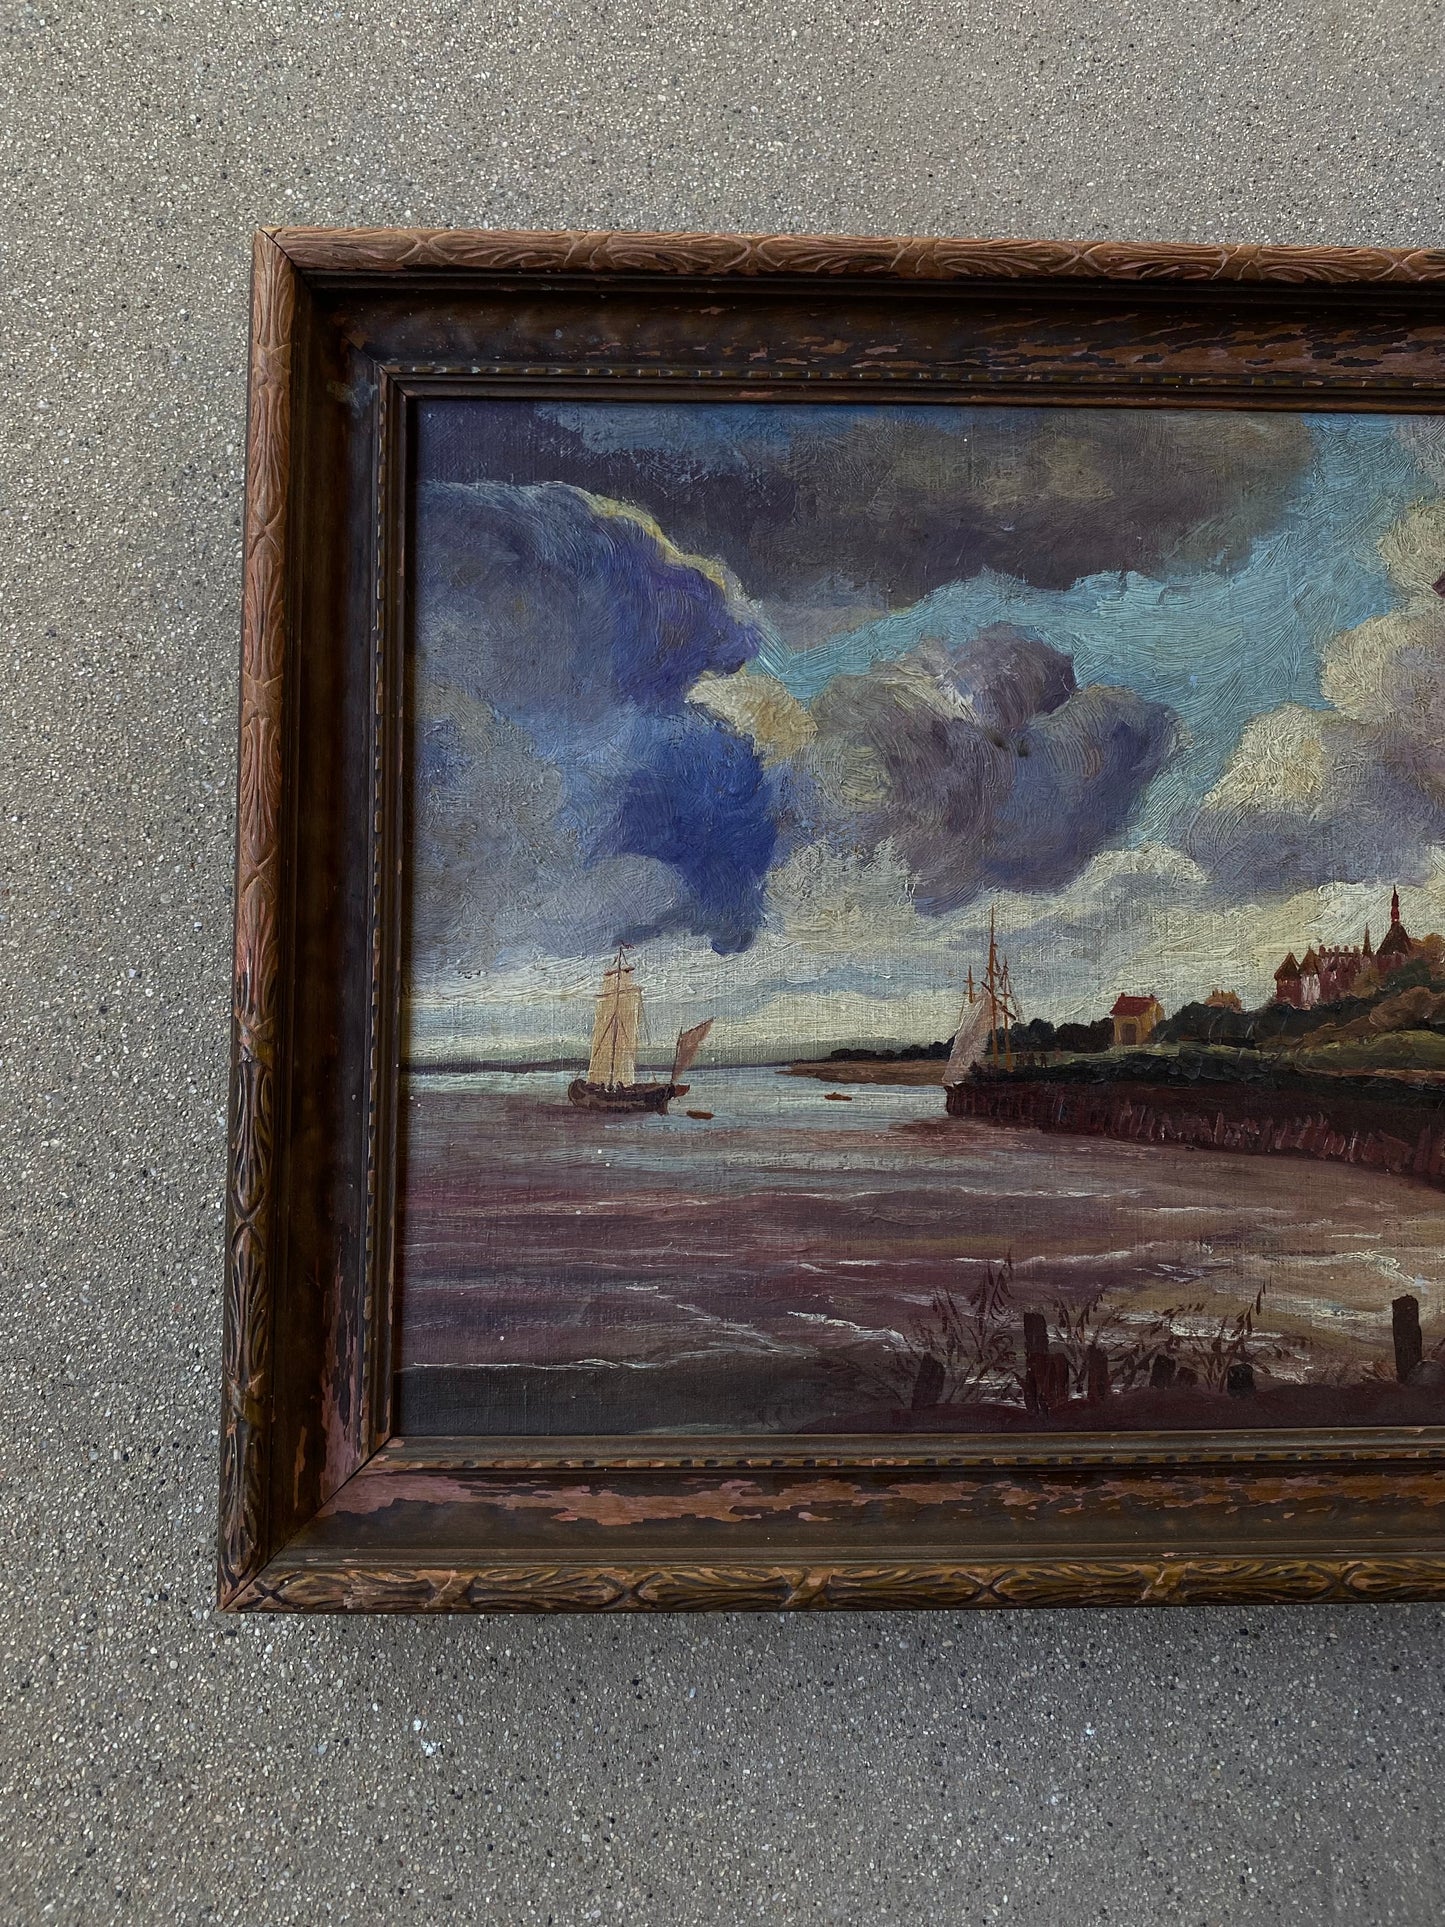 Antique Danish Impressionist Oil Painting in Wood Frame- 15 x 21”